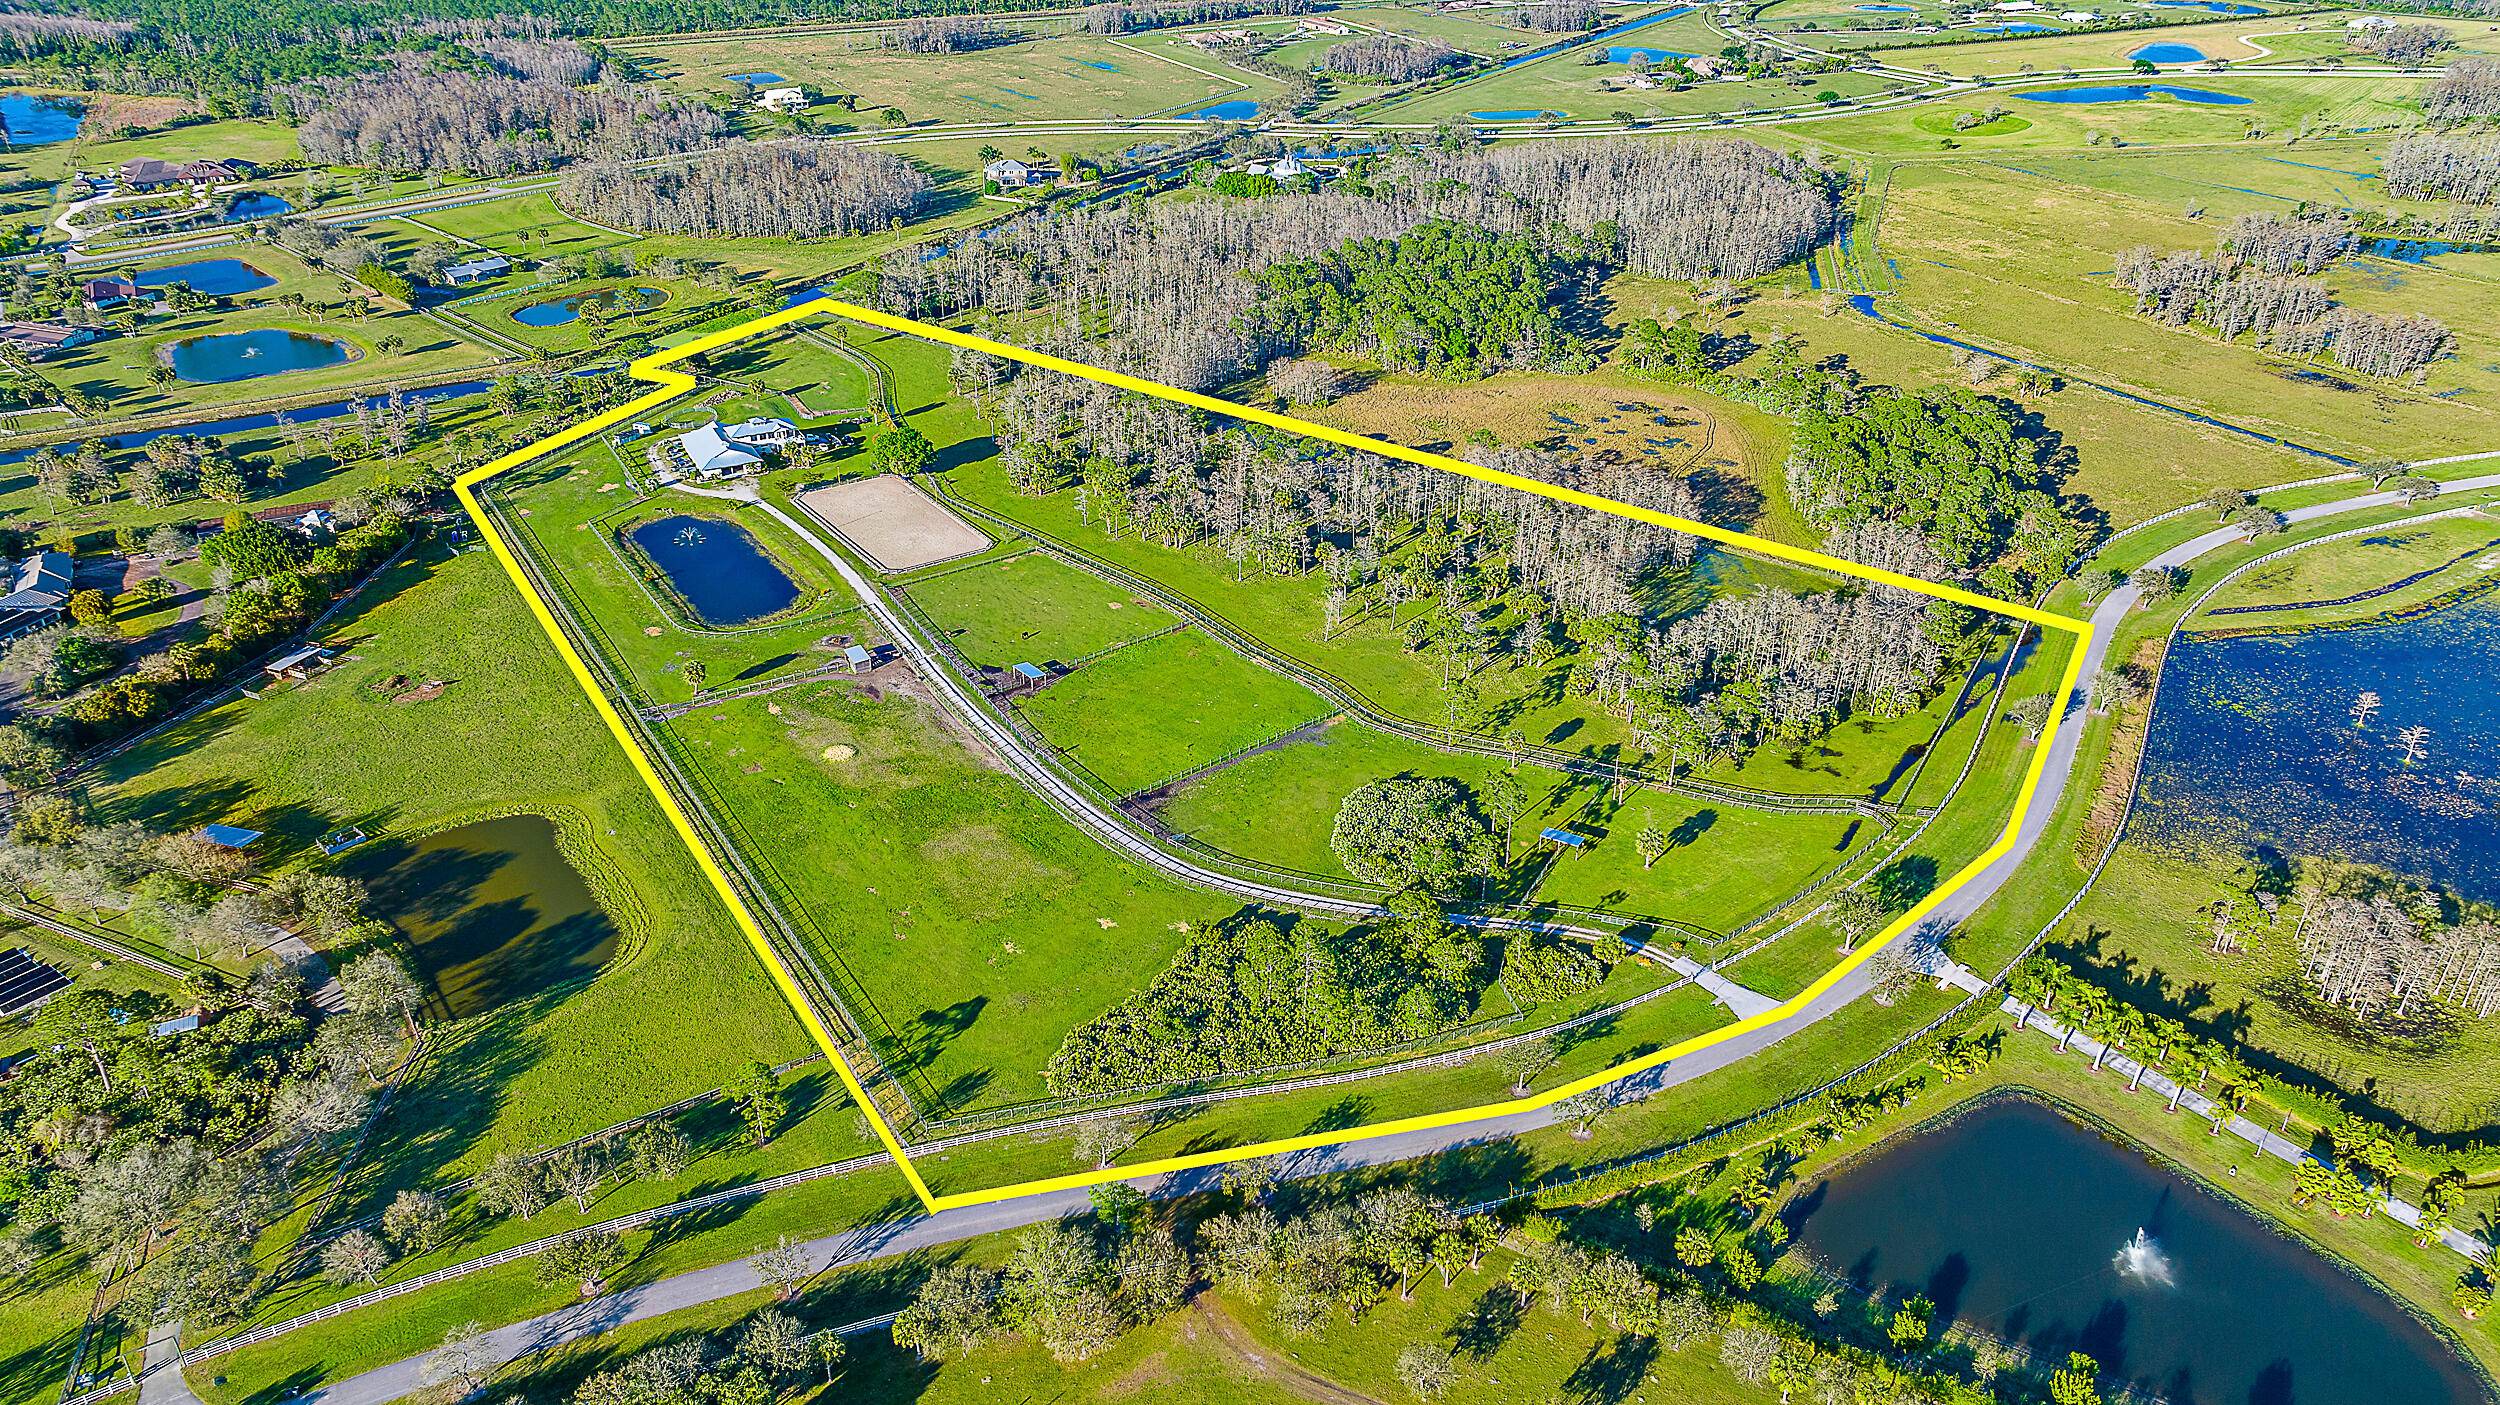 This 21 acre parcel is a prime piece of land with modern equestrian guest amenities, all curated in 2019.